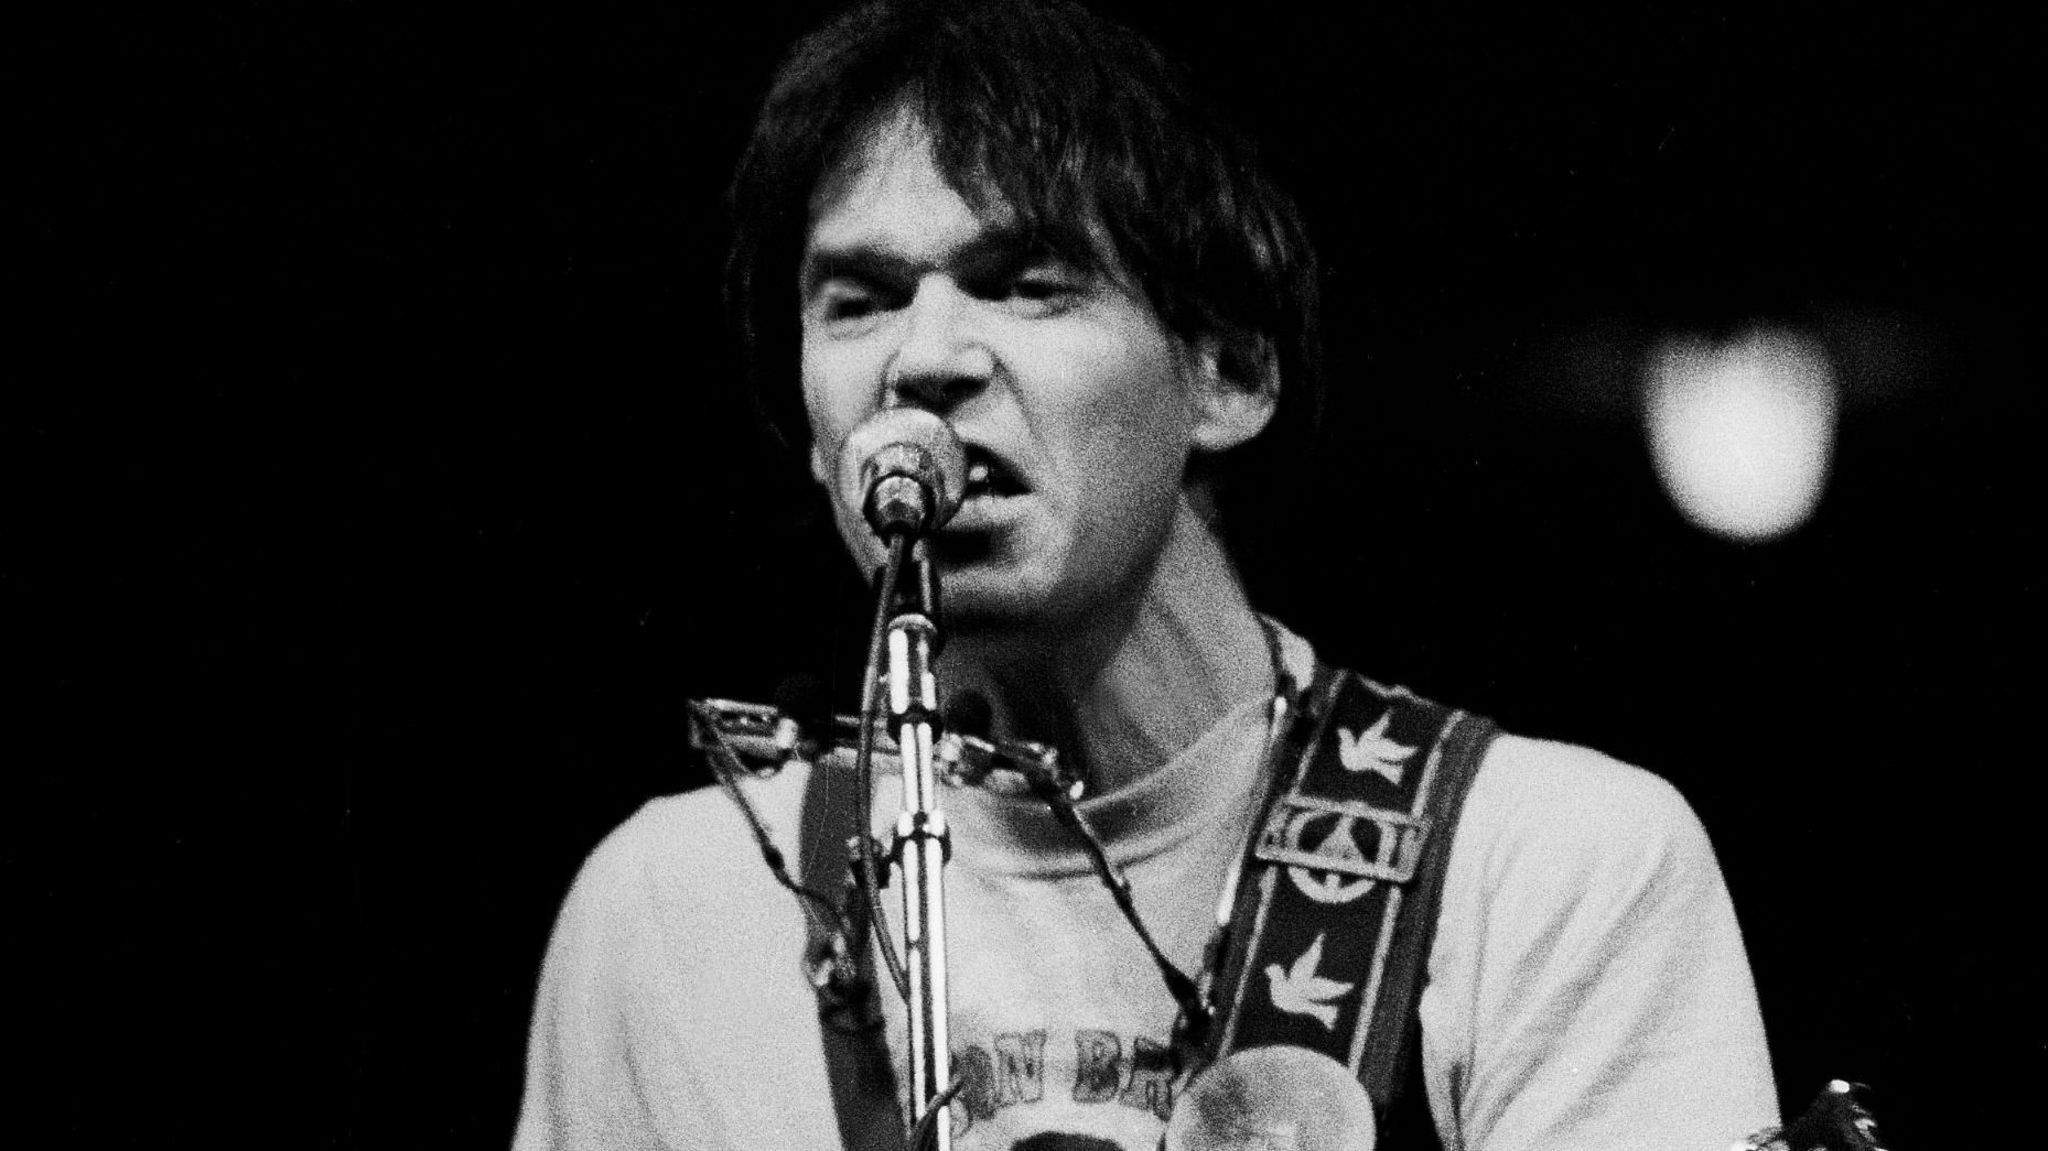 Canadian Folk and Rock musician Neil Young plays guitar as he performs onstage at the Chicago Stadium, Chicago, Illinois, October 14, 1978. 